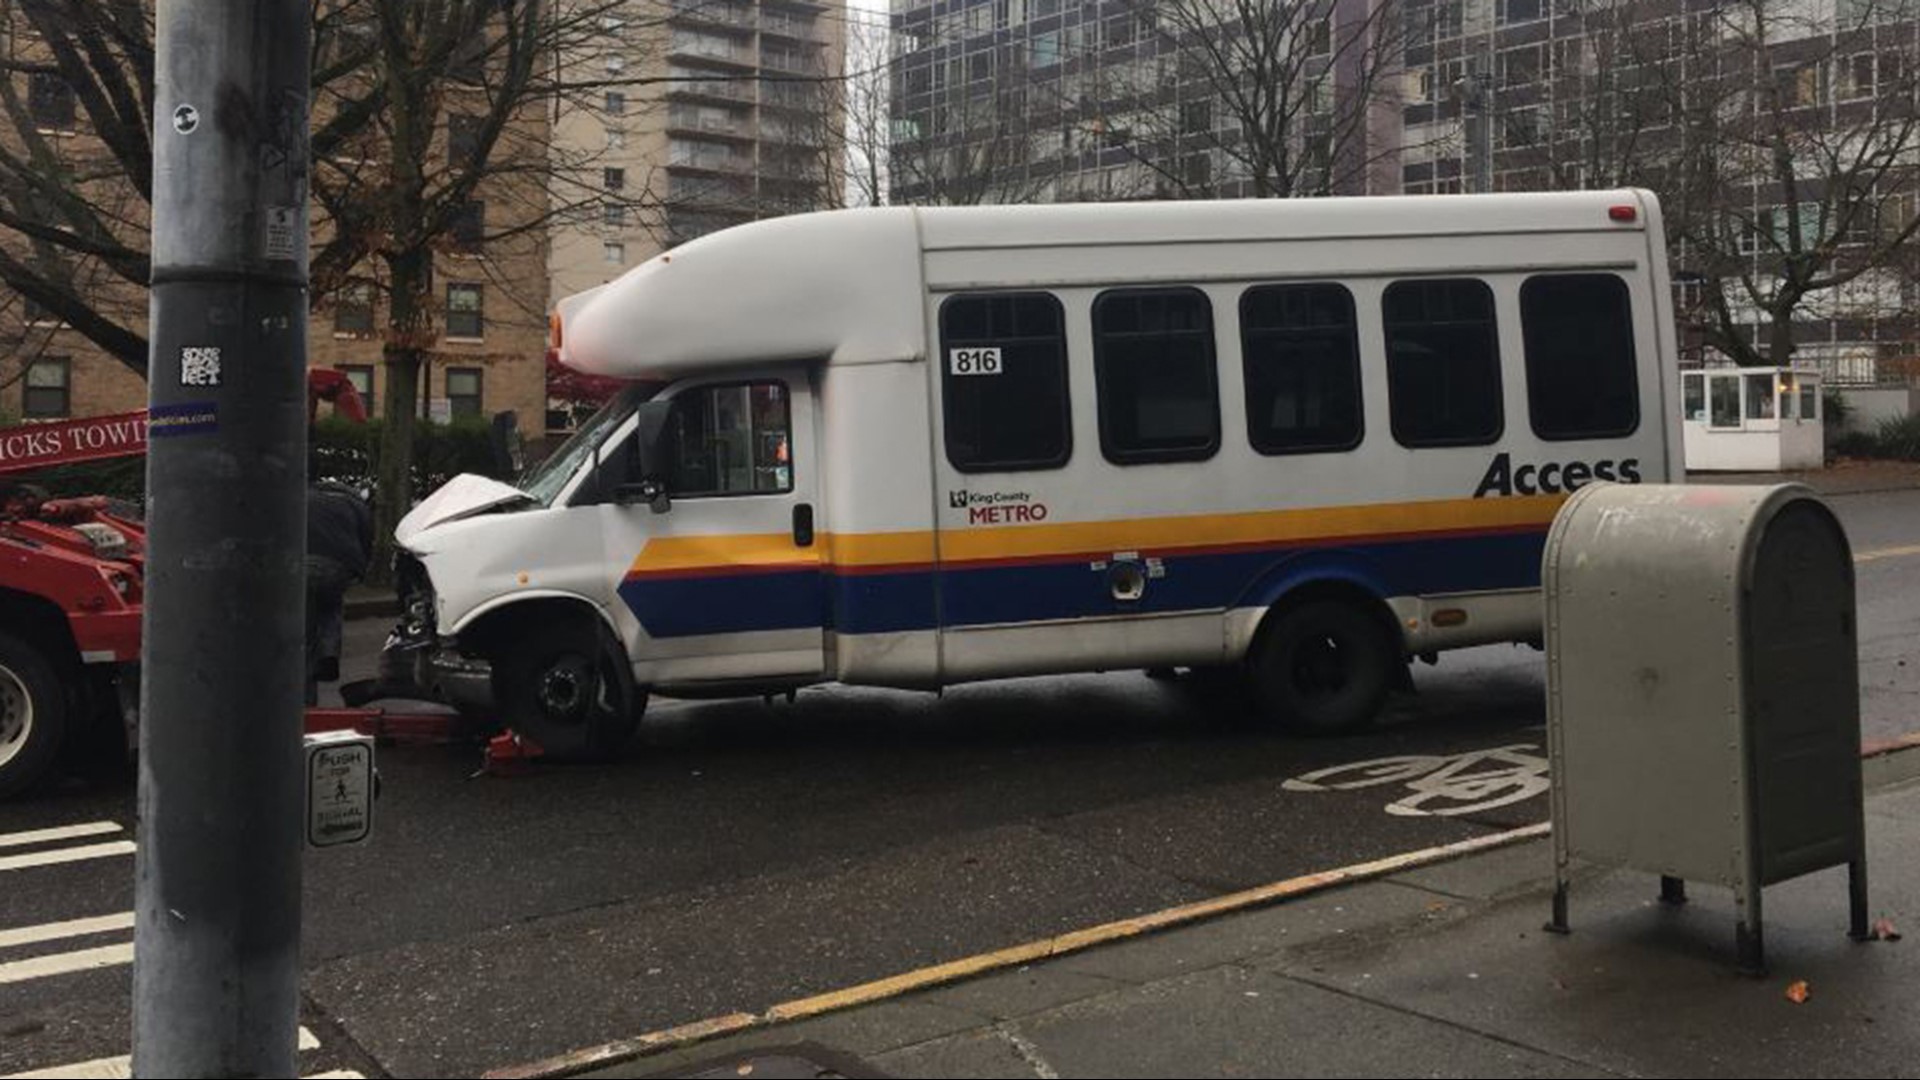 The collision happened at Boren Ave. and Seneca St. in Seattle. Seattle police said there were no significant injuries.